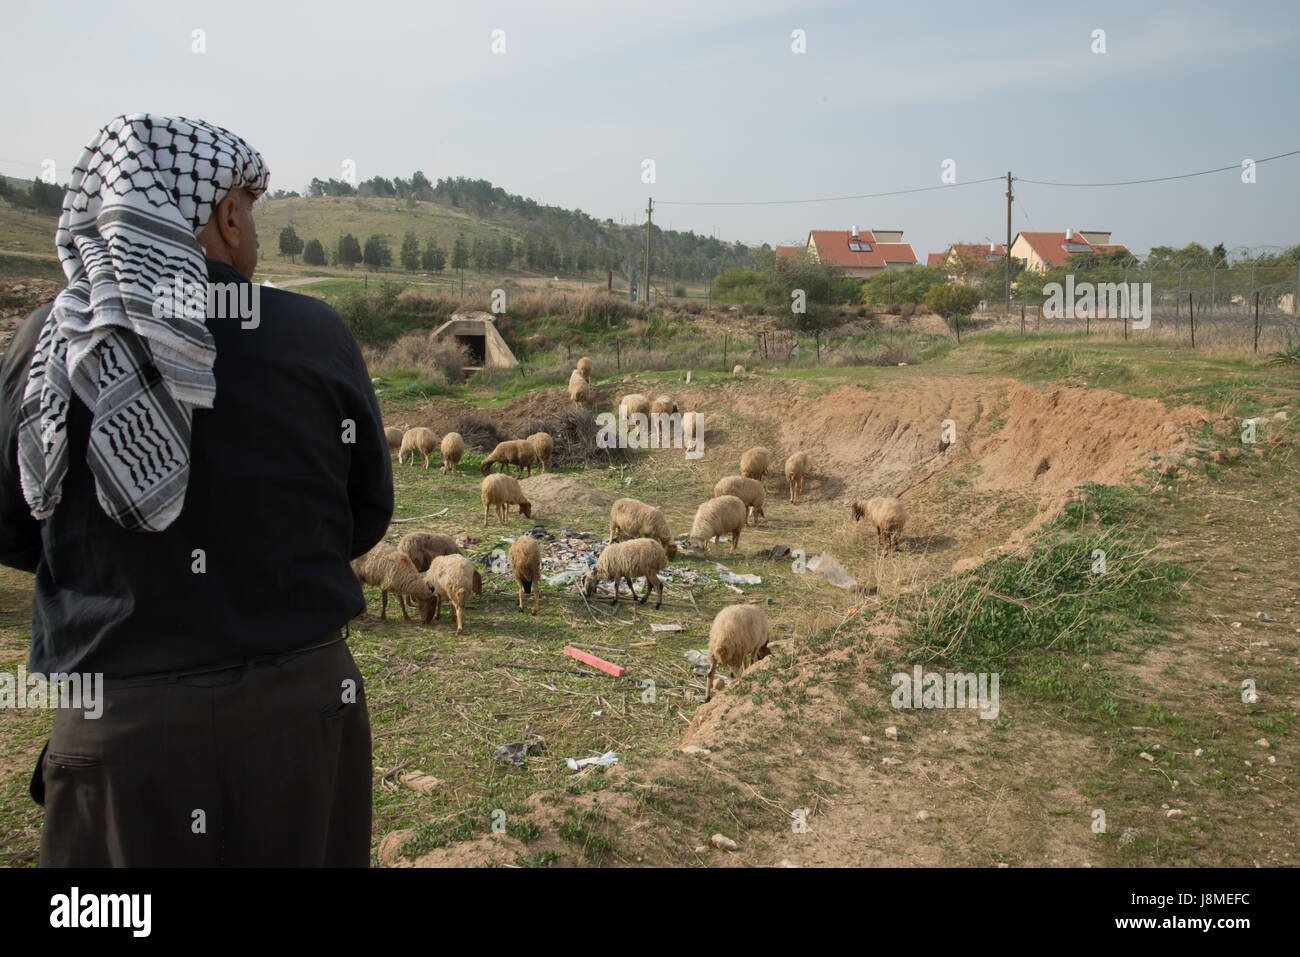 A Palestinian from the Jordan Valley community of Al Farisiya tends his flock of sheep near the Israeli settlement of Mehola, West Bank, January 22, 2014. Al Farisiya has no connection to electricity or water. Even purchasing water is difficult as area farmers are reluctant to sell even a portion of their limited quotas used for irrigation. Some residents leave during the summer when no water is available. The village is directly adjacent to the Israeli settlement of Mehola, which enjoys full access to the Israeli water and electrial system. All Israeli settlements in the occupied Paelstinian  Stock Photo